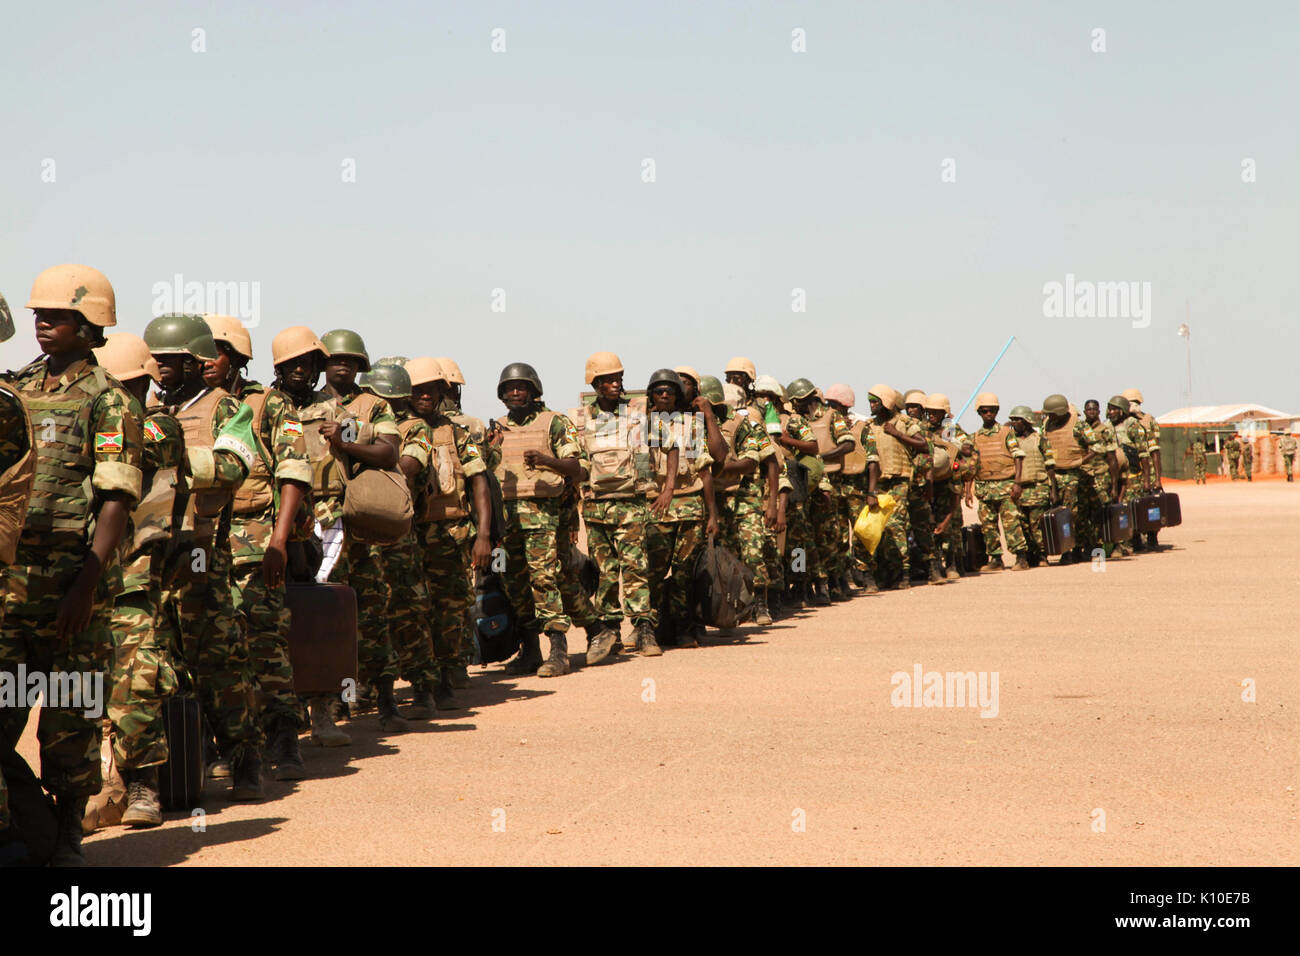 Amisom Burundian 80 contingent of troops depart from Kismayo International Airport for rotation, after serving more than one year in Kismayo, Somalia. On November 17, 2014 AUUN IST Photo (15198103523) Stock Photo